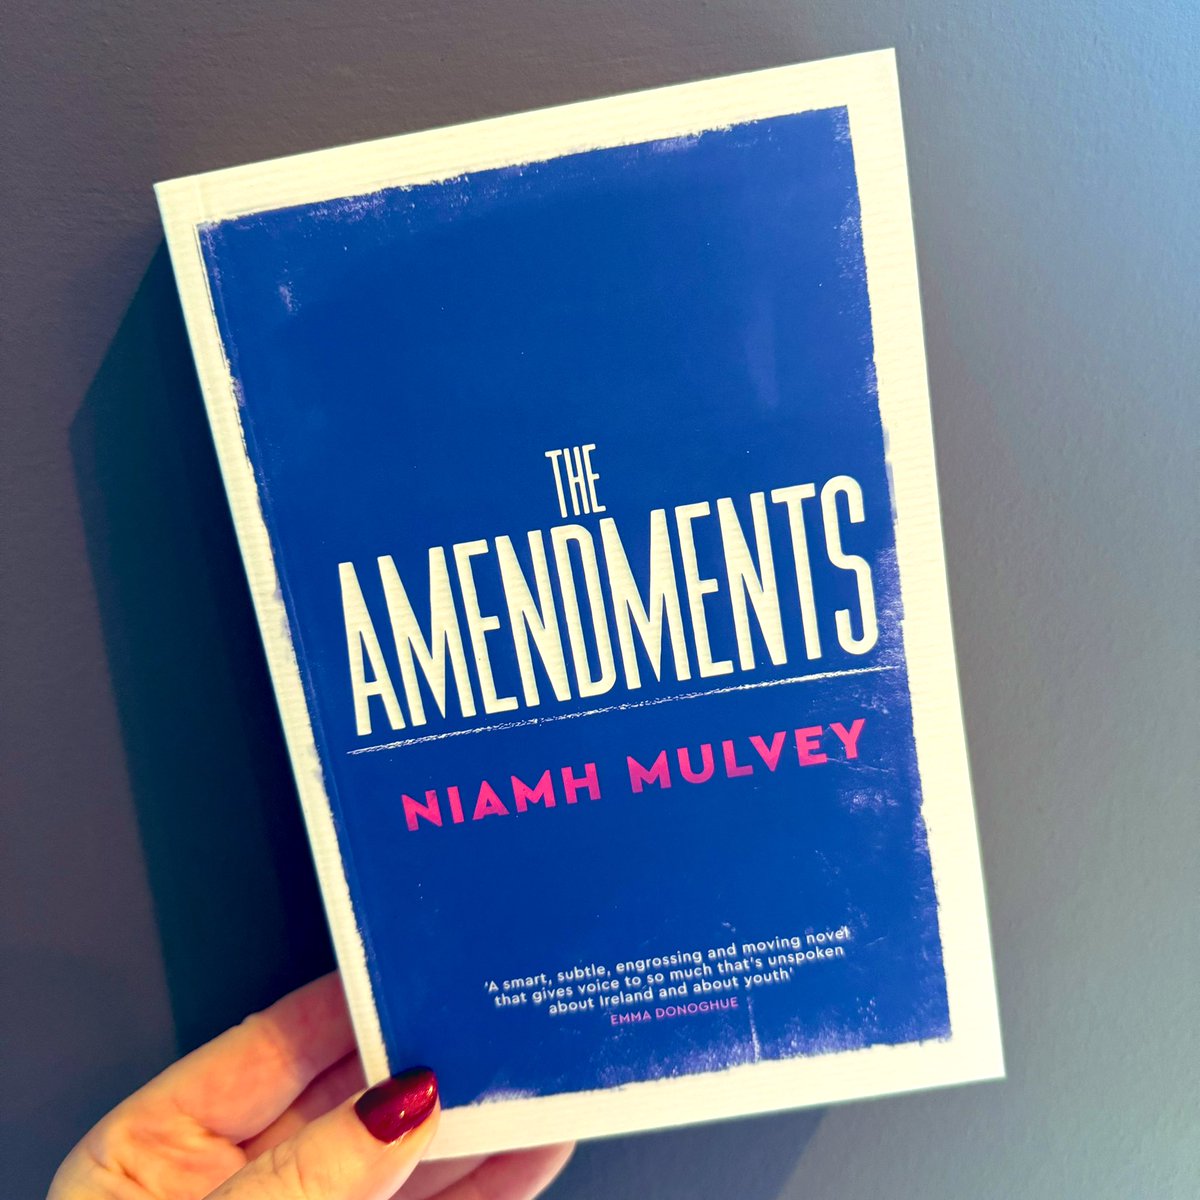 Thank you @siobhanslatt_ for my copy of #TheAmendments by Niamh Mulvey - it’s out in April from @picadorbooks and sounds fabulous!